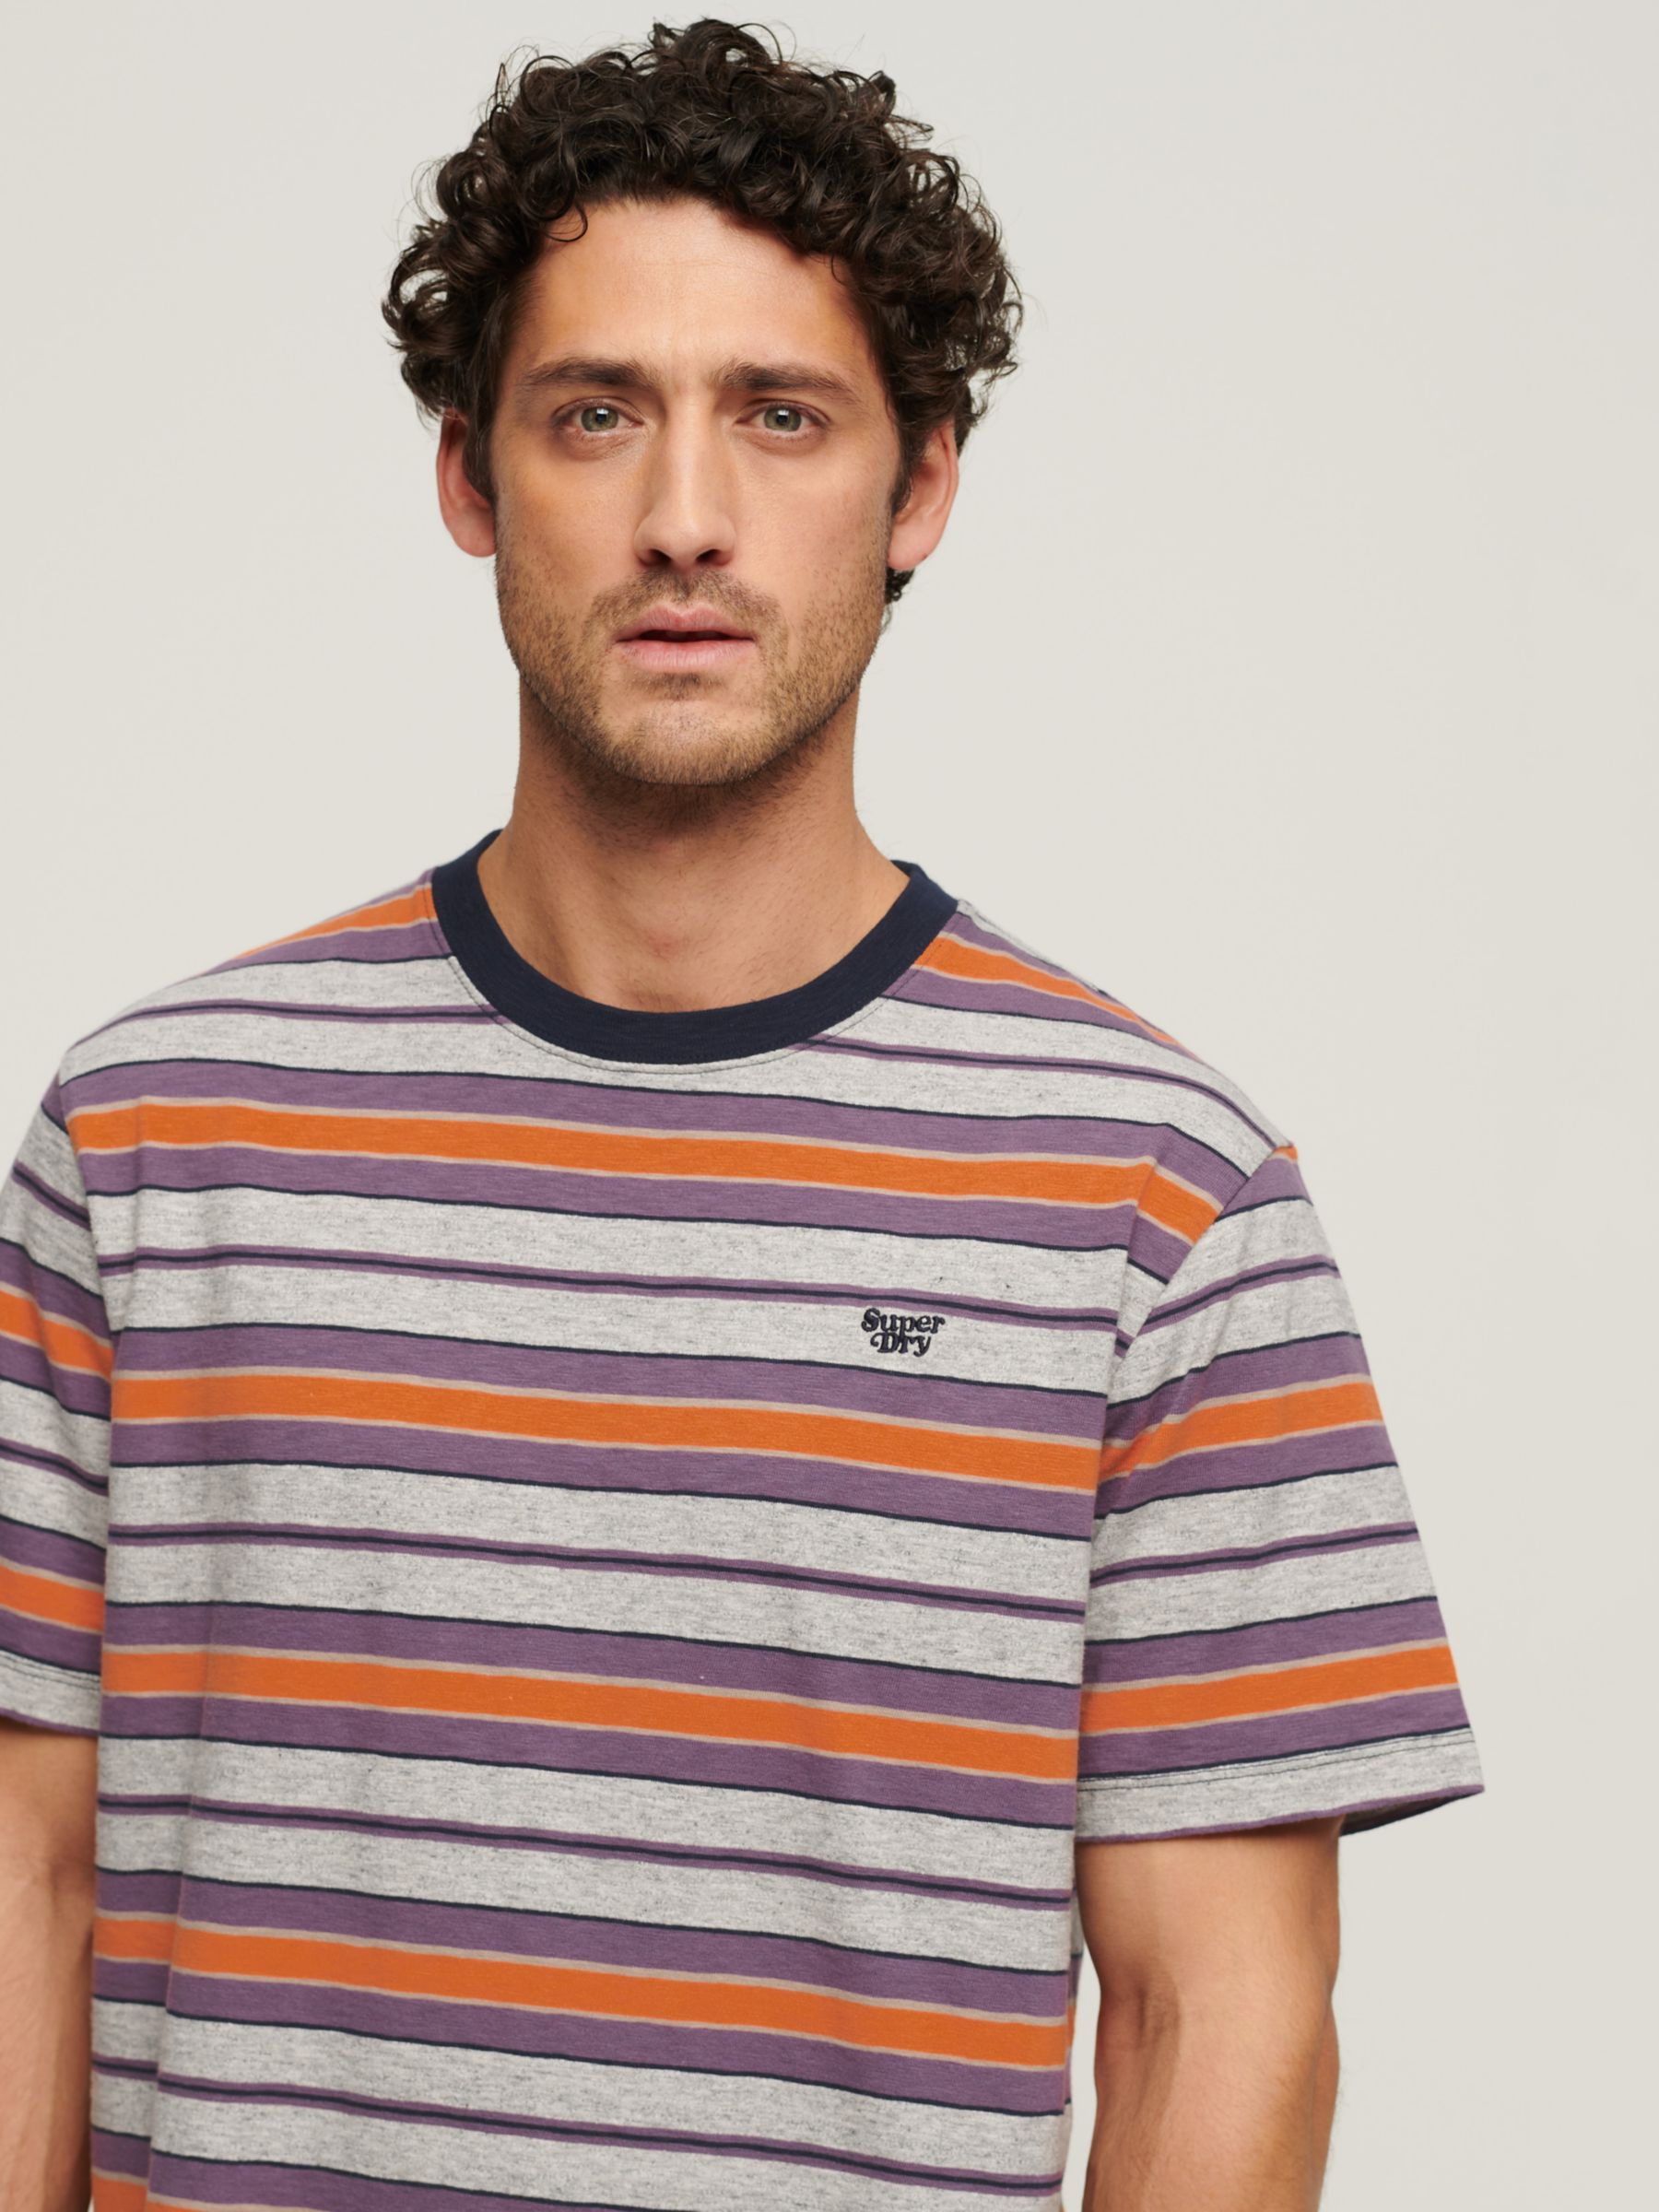 Buy Superdry Relaxed T-Shirt Online at johnlewis.com